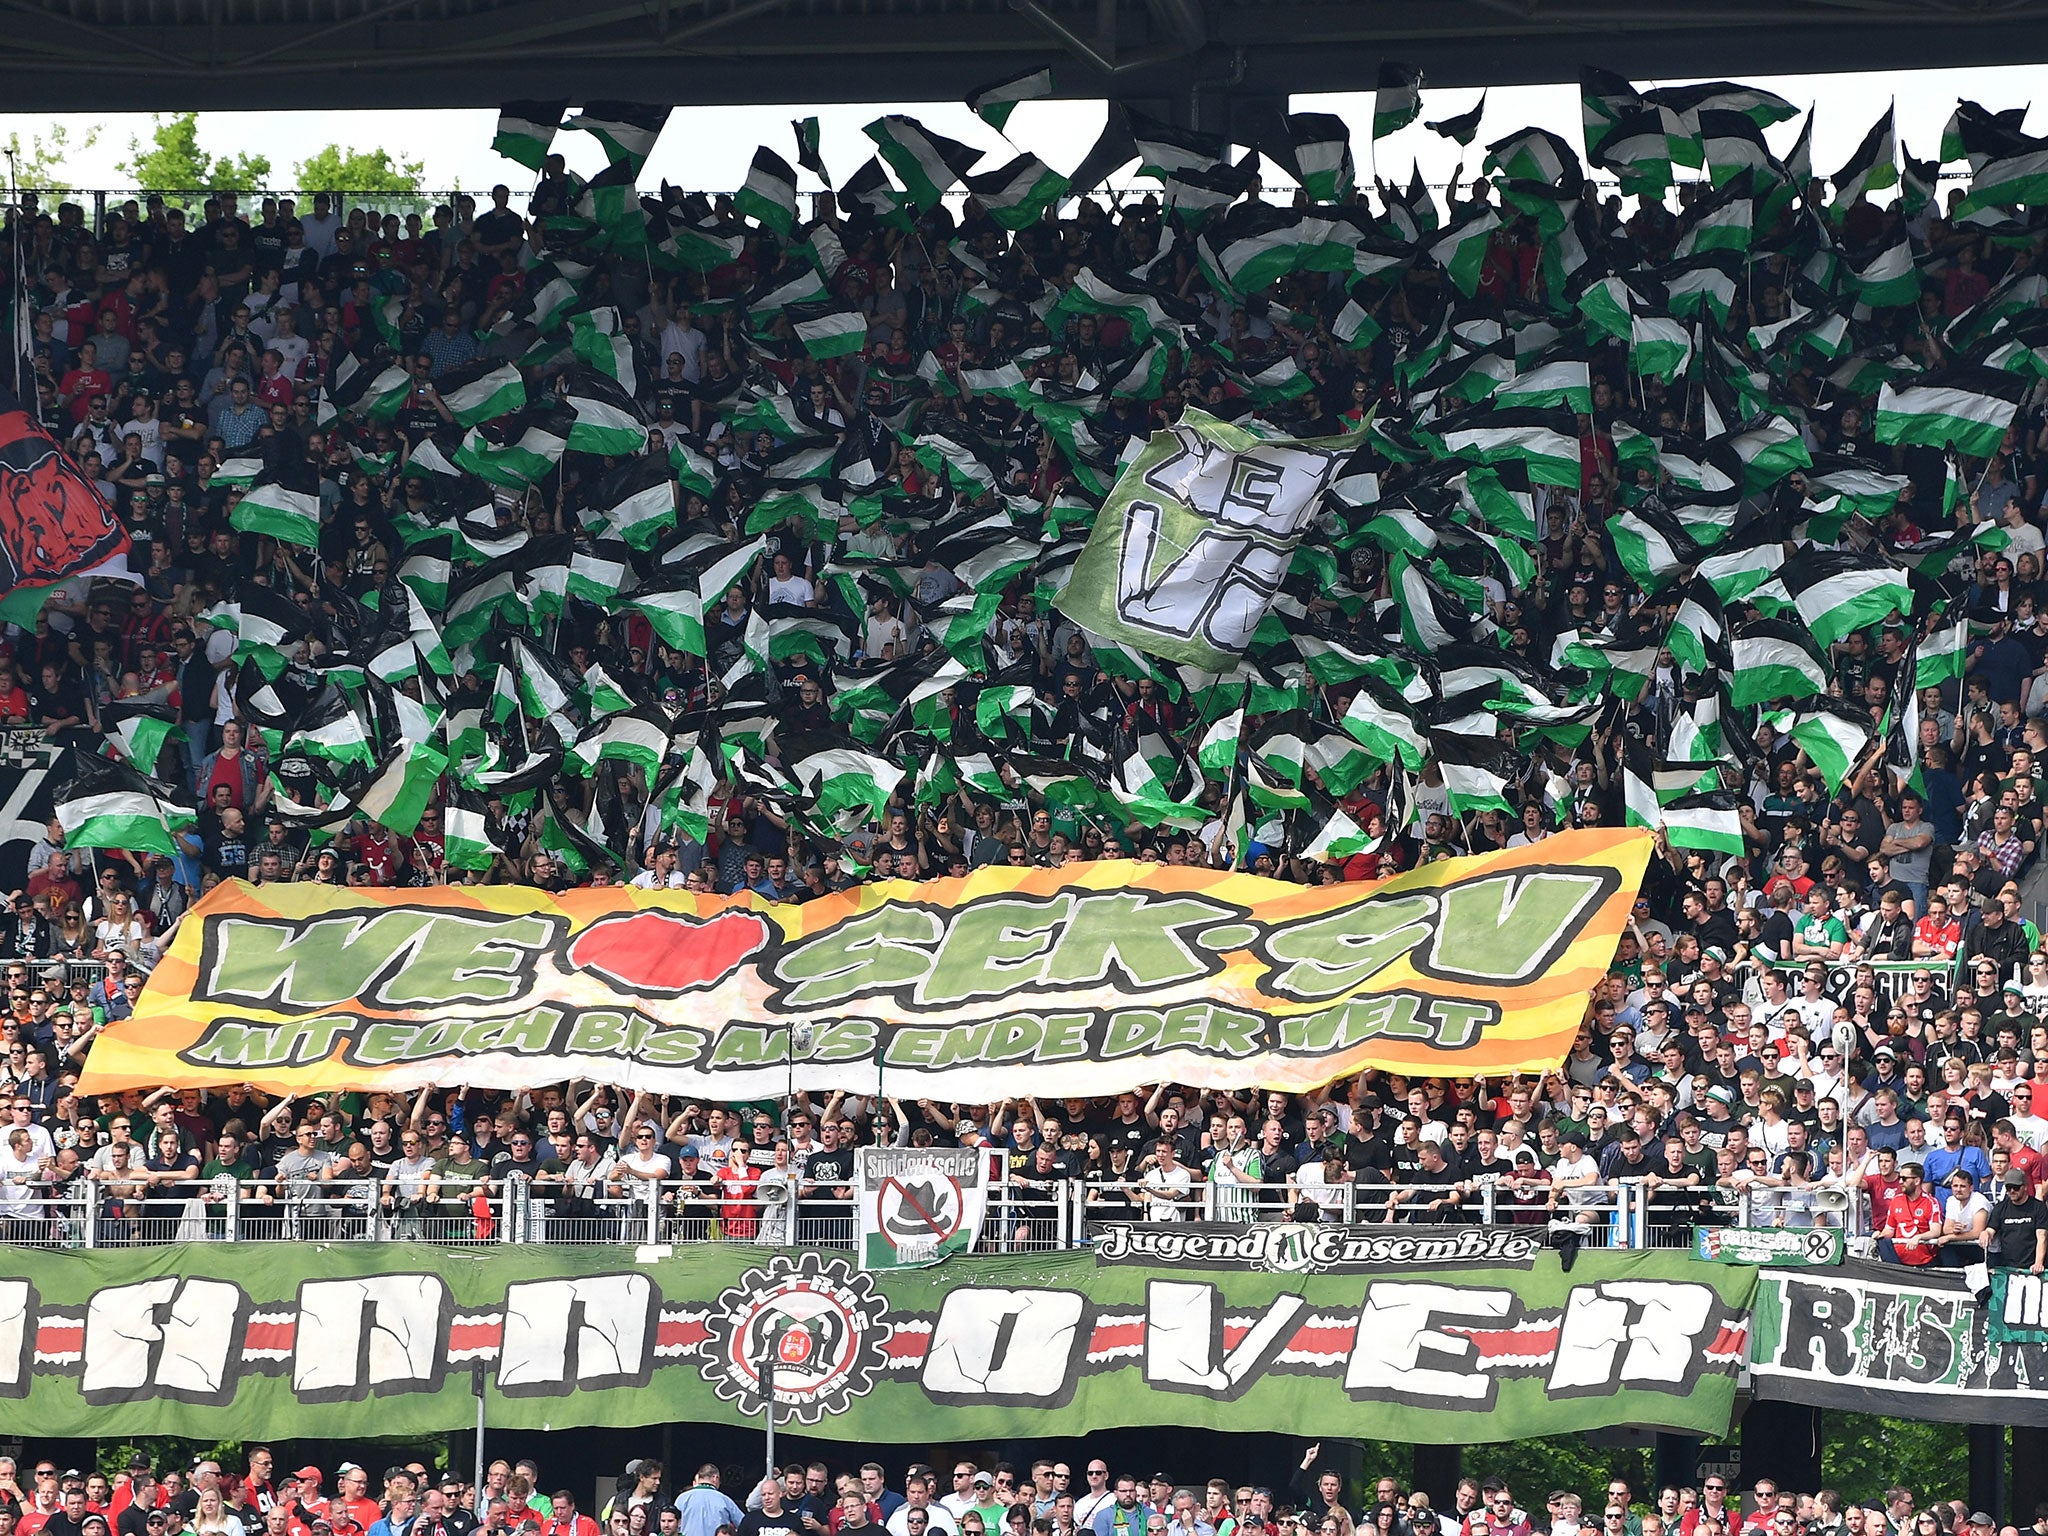 Hannover's fans still believe in survival